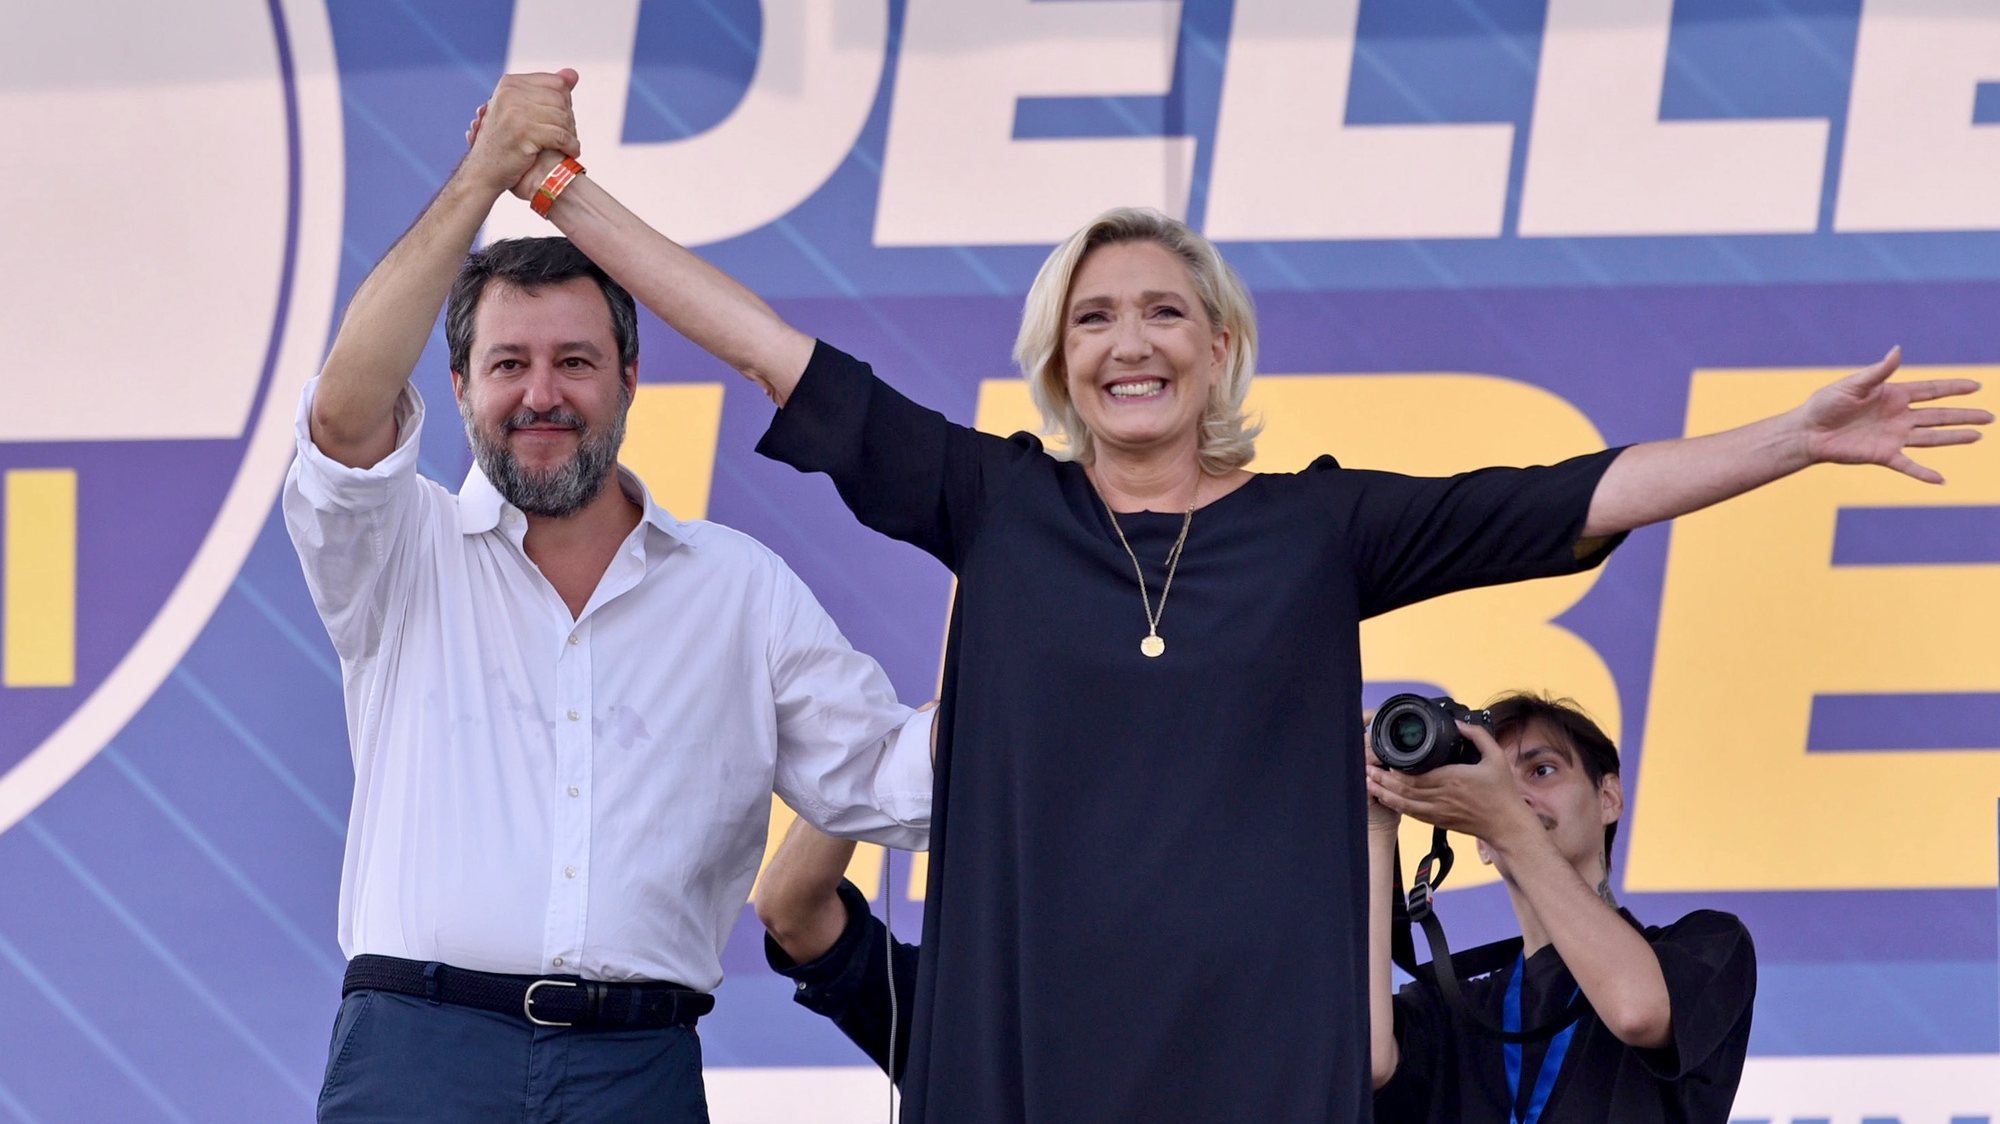 epa10866201 Italy&#039;s Lega party leader Matteo Salvini (L) with president of France&#039;s Rassemblement National Marine Le Pen (R) join hands during the traditional Lega (League) party rally in Pontida (Bergamo), northern Italy, 17 September 2023. Italy&#039;s League party held its annual rally at Pontida, with Marine Le Pen, the president of France&#039;s National Rally (RN) party as the guest of honor. &#039;You in Italy and we in France are engaged in the same fight, the fight for freedoms, for the homeland&#039;, said Marine Le Pen speaking at the League rally in Pontida.  EPA/MICHELE MARAVIGLIA